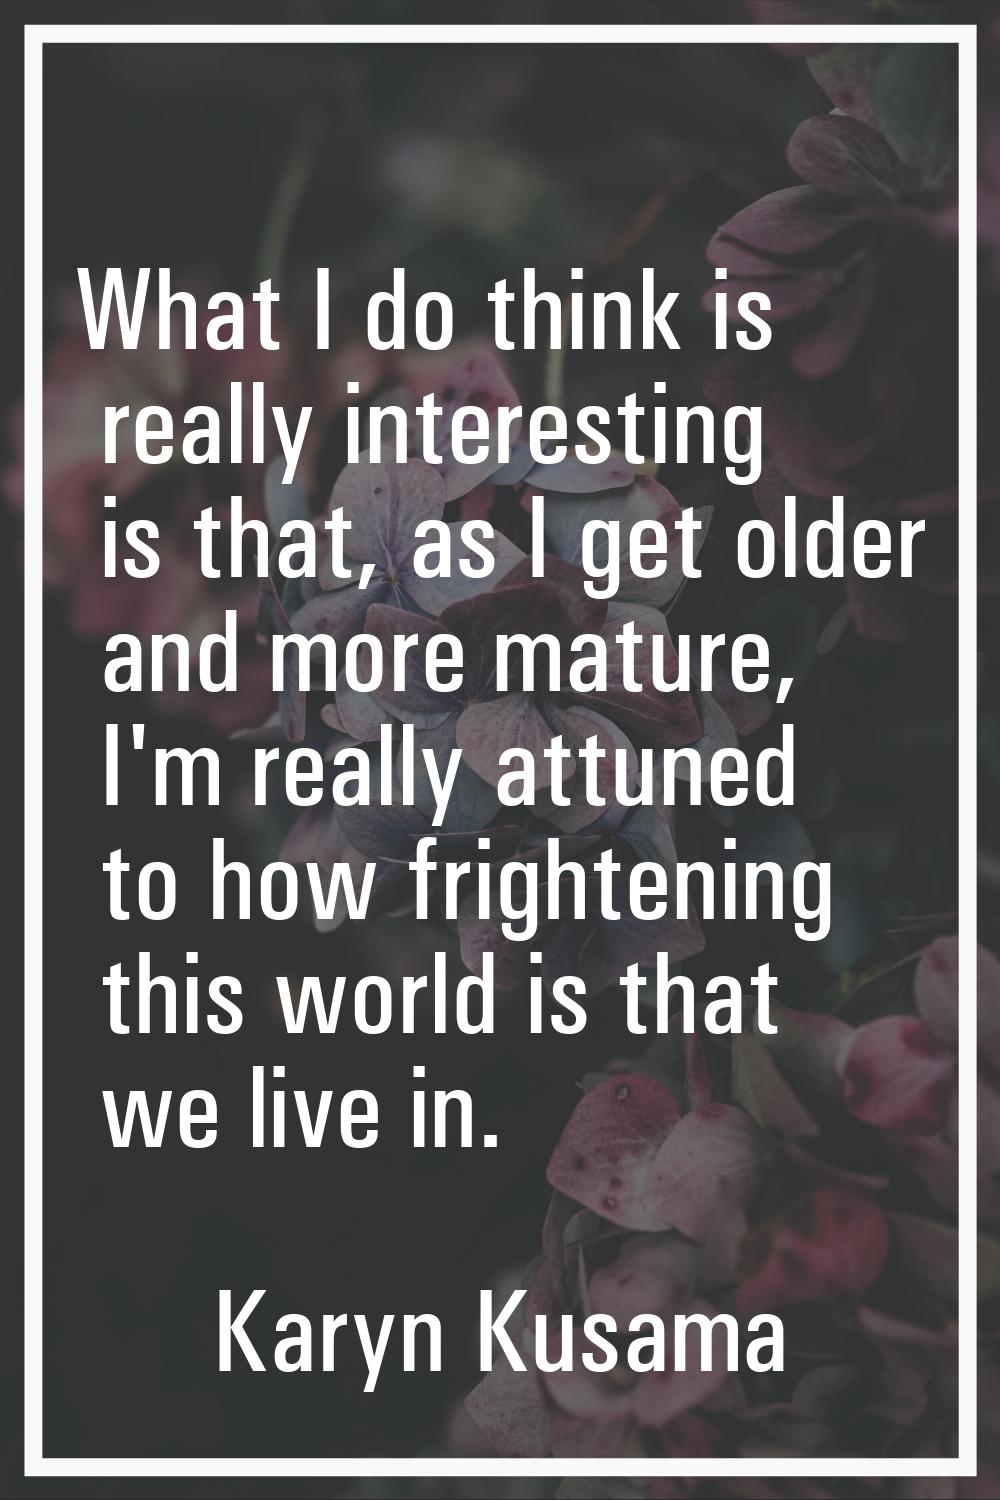 What I do think is really interesting is that, as I get older and more mature, I'm really attuned t